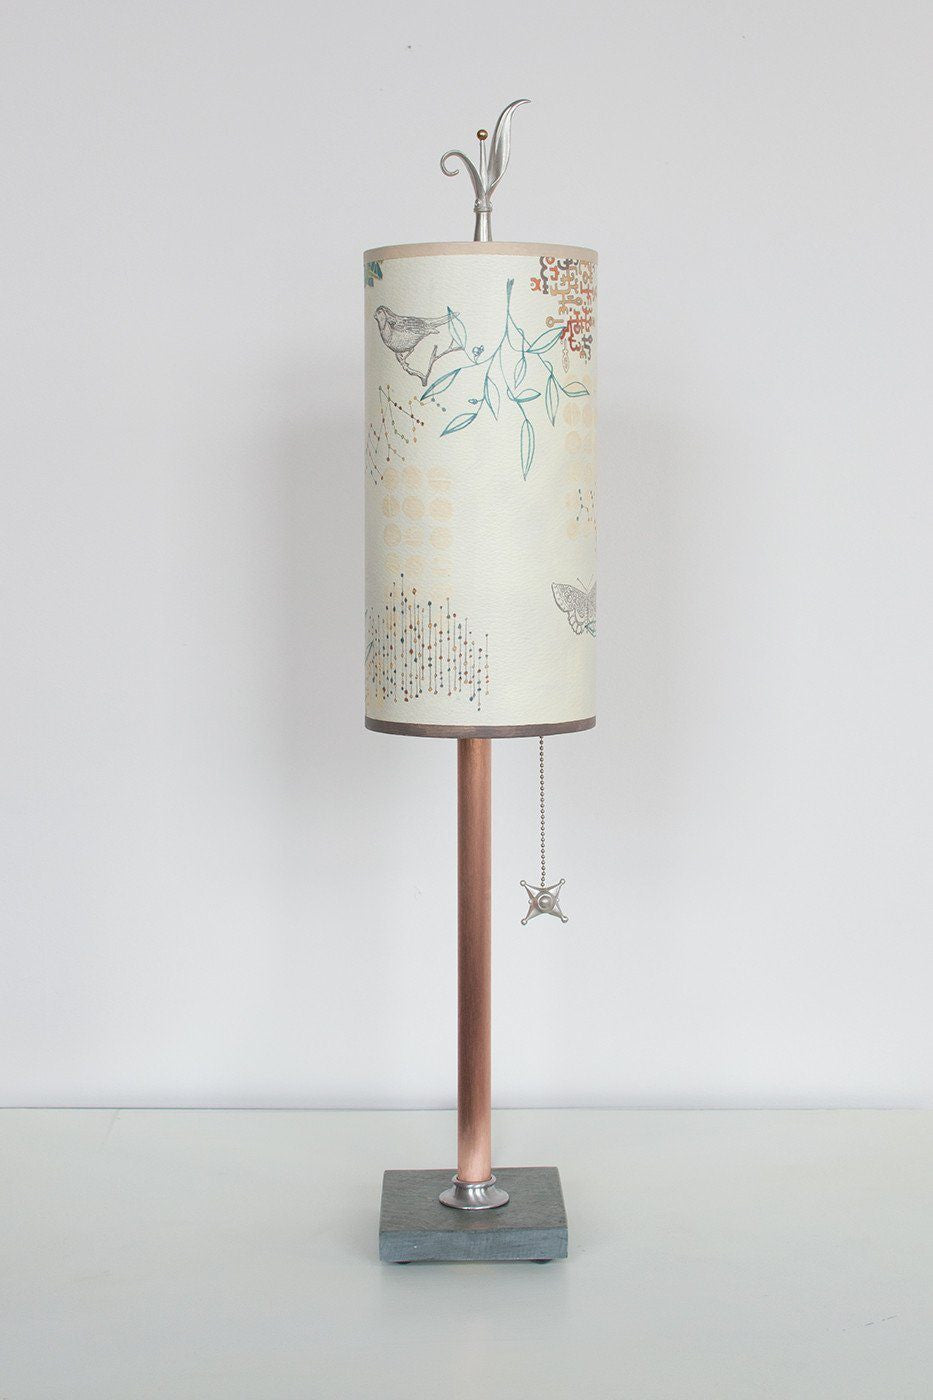 Janna Ugone & Co Table Lamps Copper Table Lamp with Small Tube Shade in Ecru Journey